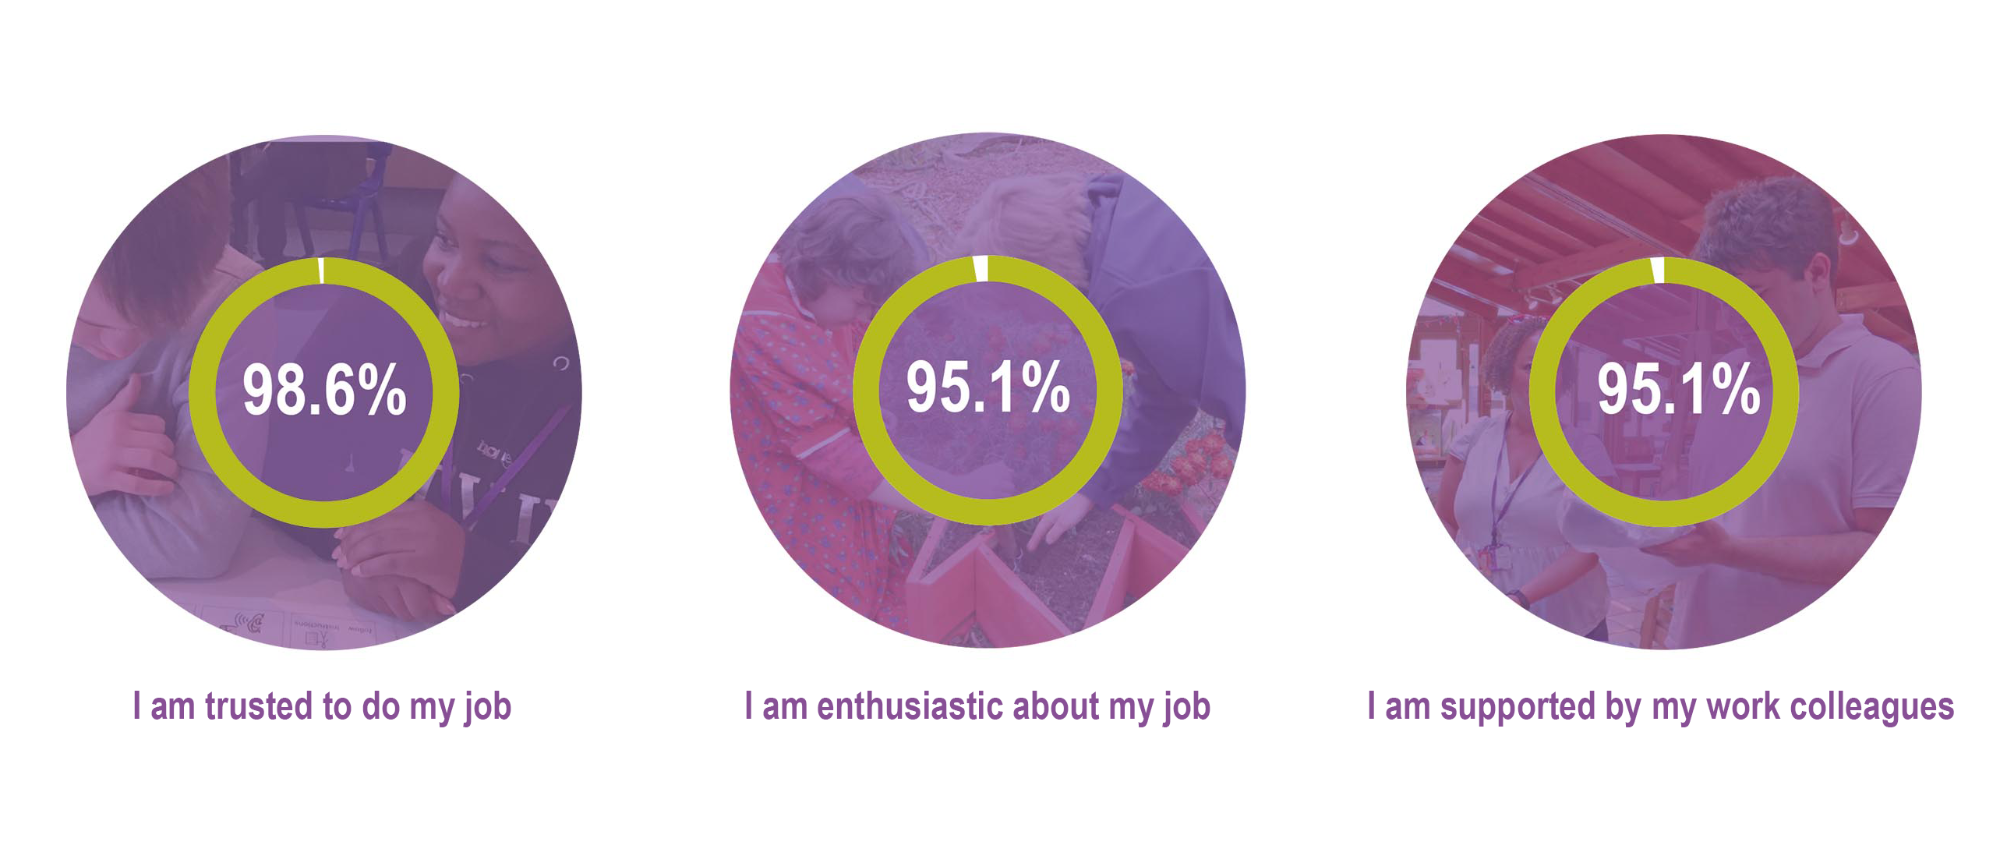 Three pie charts showing data from a staff survey. 1 chart showing 98.6% of staff feel trusted to do their job. 2nd chart showing 95.1%of staff are enthusiastic about their job. The third chart showing 95.1% of people feel supported by their work colleagues.